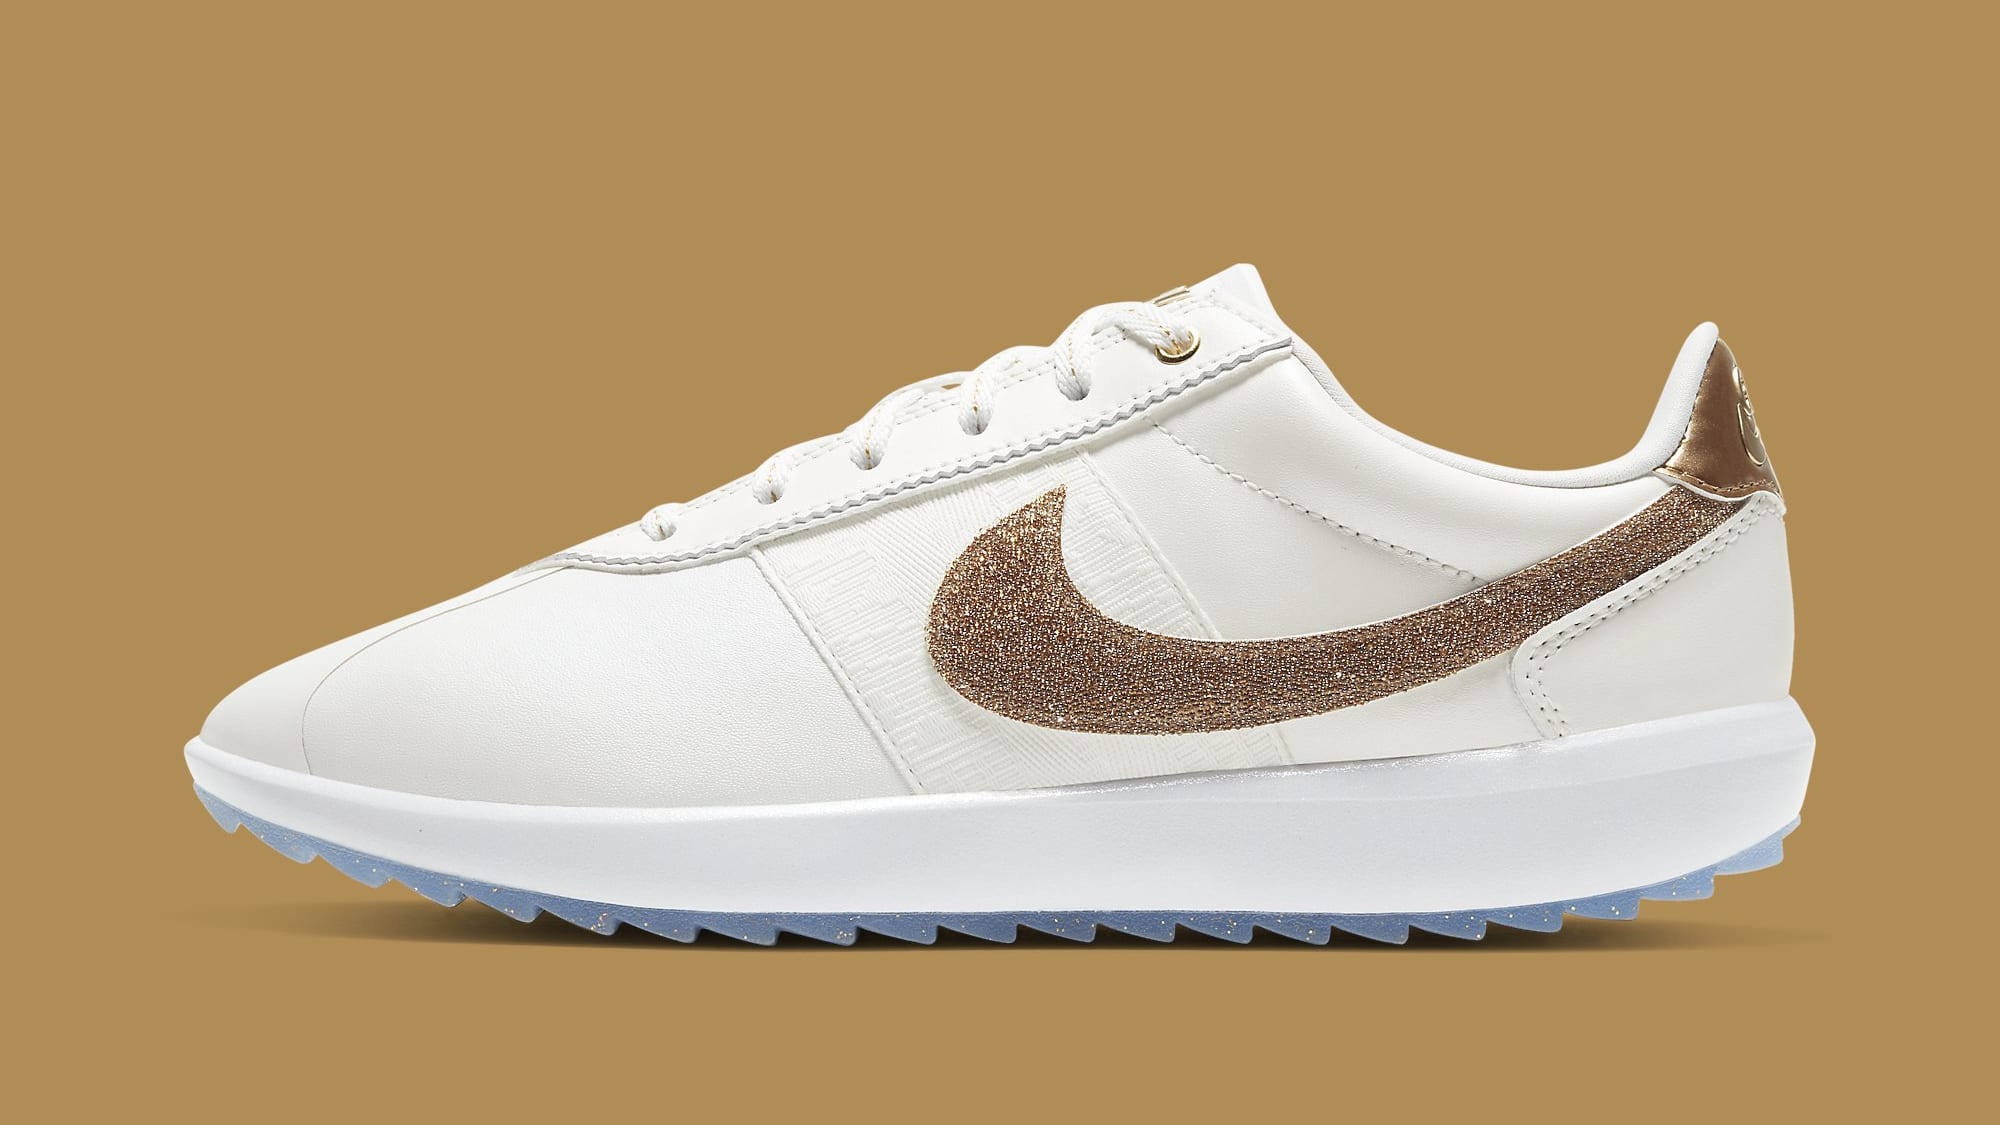 Nike Just Dropped a Swarovski Collection Exclusively | Complex